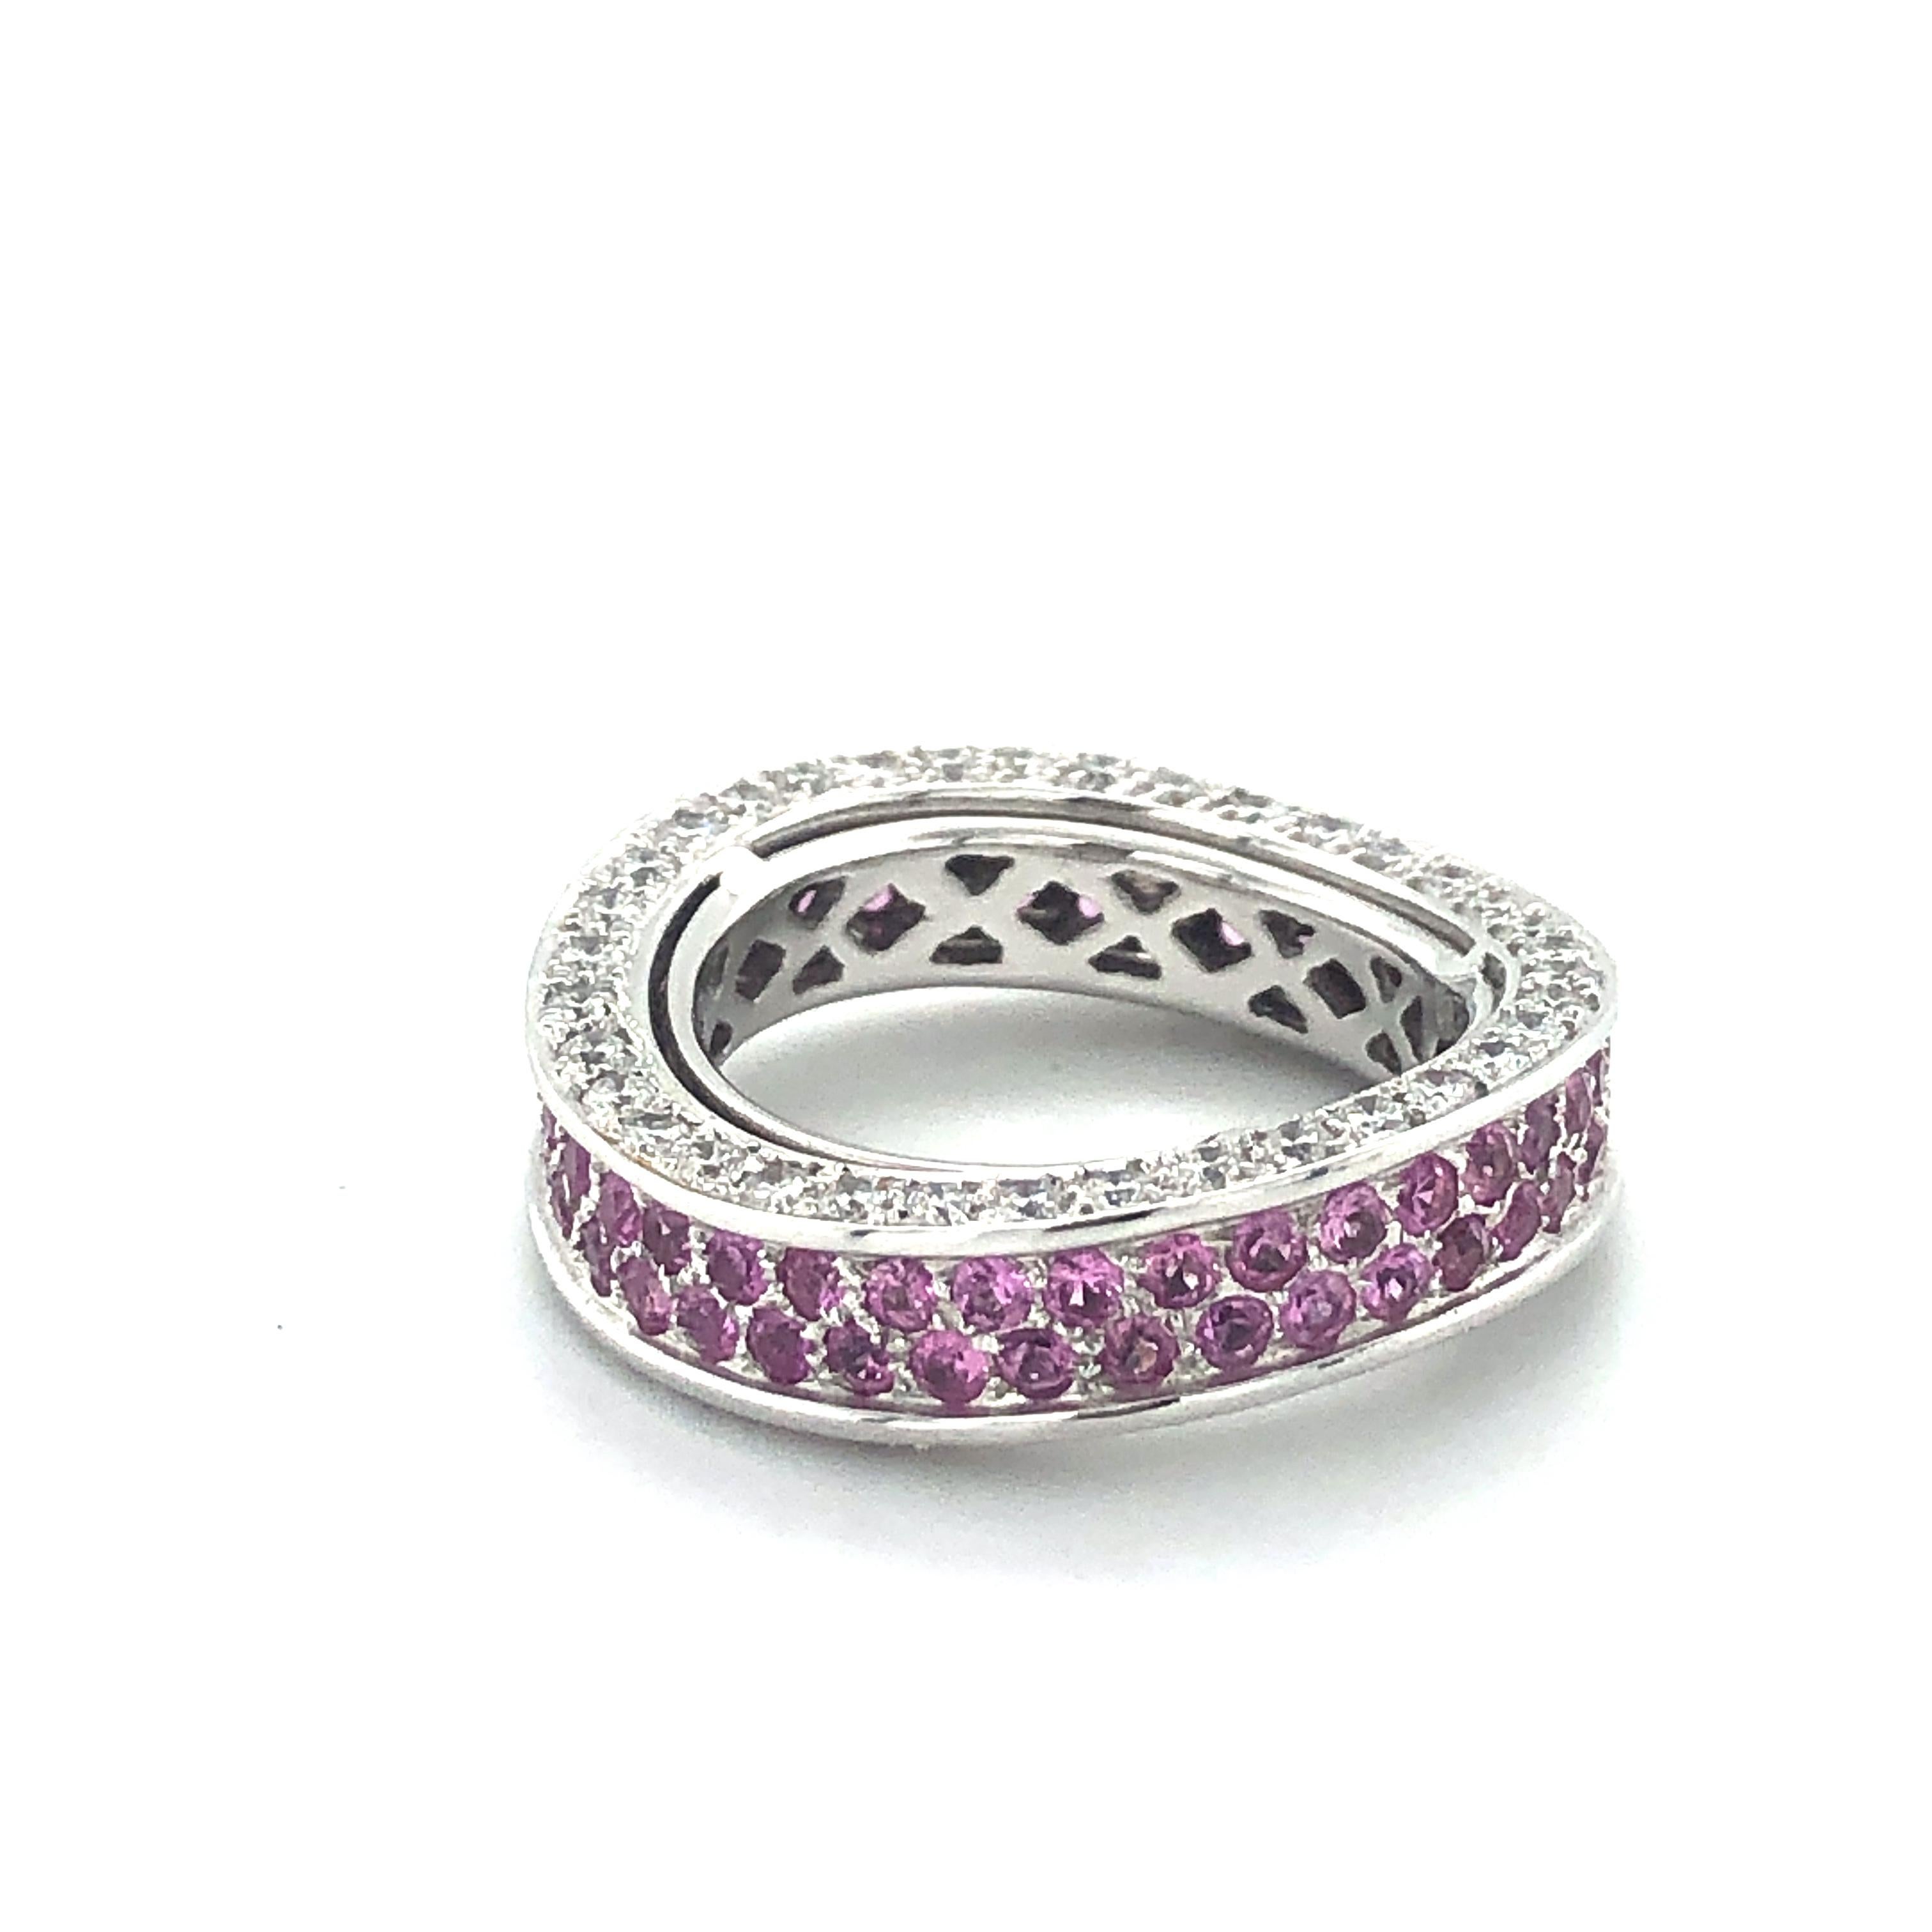 This wave-shaped White Gold ring is set in 2 rows with 76 pink sapphires totaling 1.84 ct. On the side, 73 brilliant-cut diamonds totaling 1.39 ct (Quality: H/si) shine.

Size: 53 / US 6.5

Maker's mark: HPB
Assay mark: 750